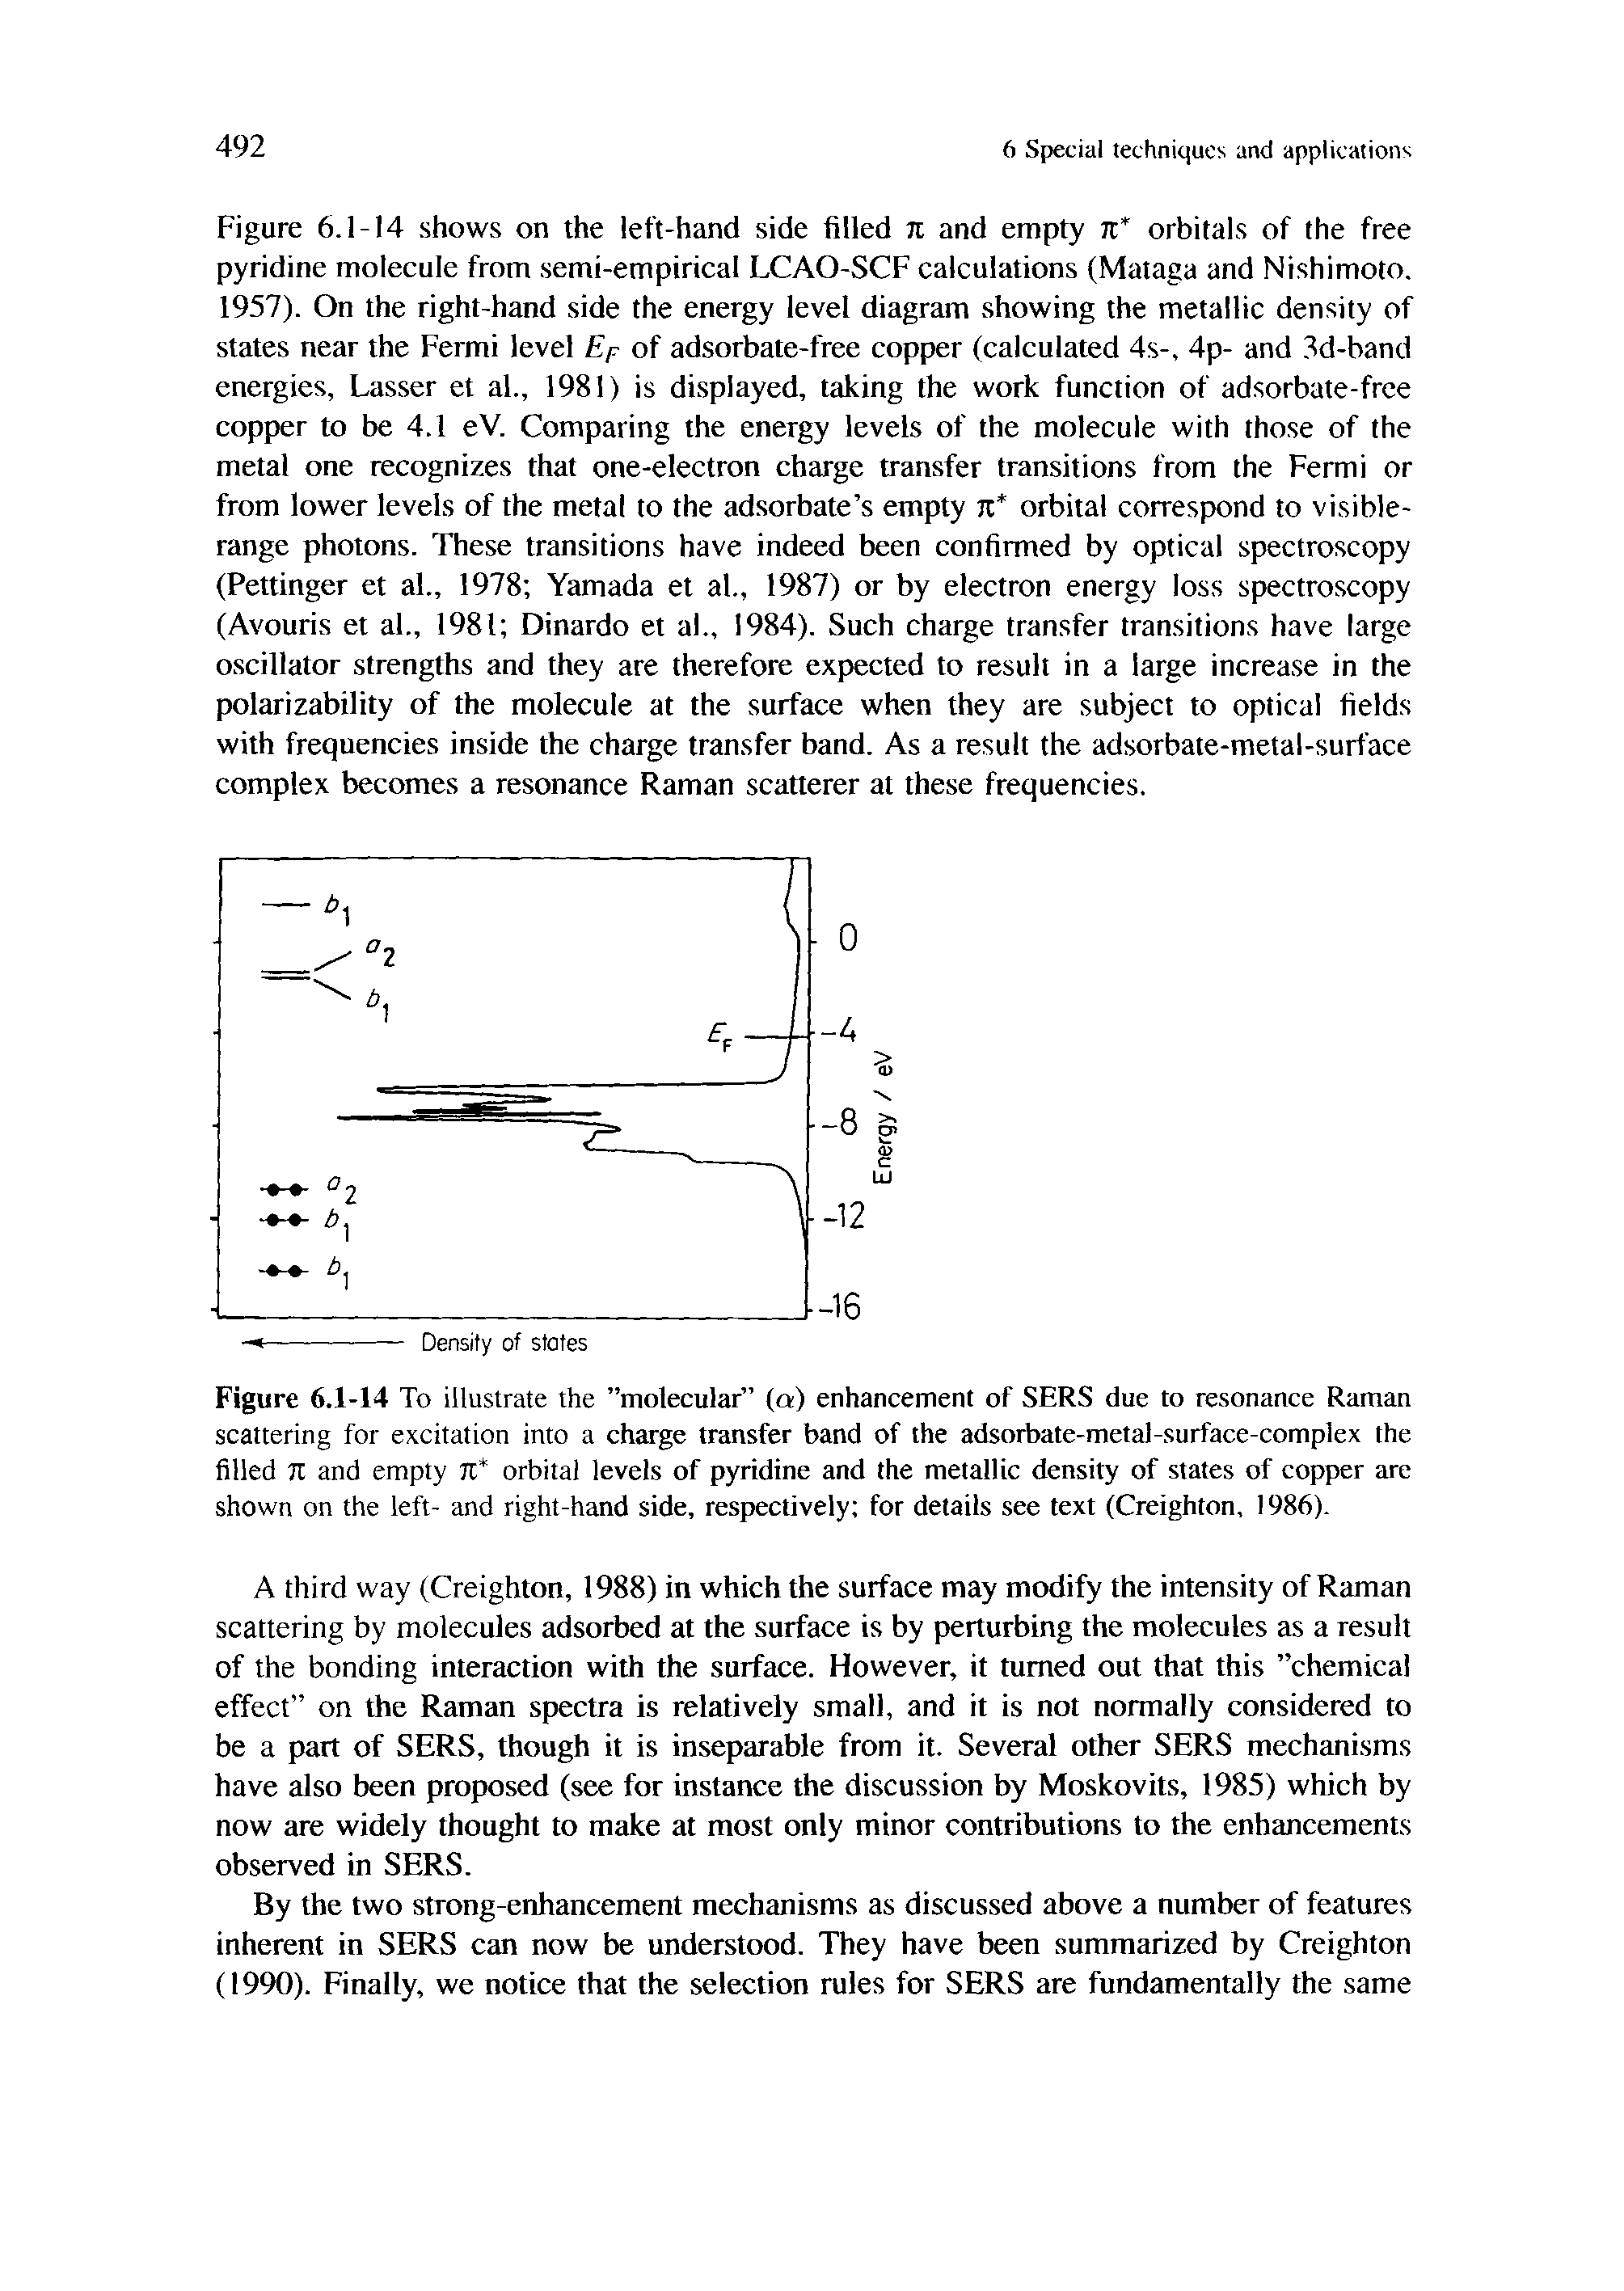 Figure 6.1-14 To illustrate the molecular (o) enhancement of SERS due to resonance Raman scattering for excitation into a charge transfer band of the adsorbate-metal-surface-complex the filled 7t and empty TC orbital levels of pyridine and the metallic density of states of copper are shown on the left- and right-hand side, respectively for details see text (Creighton, 1986).